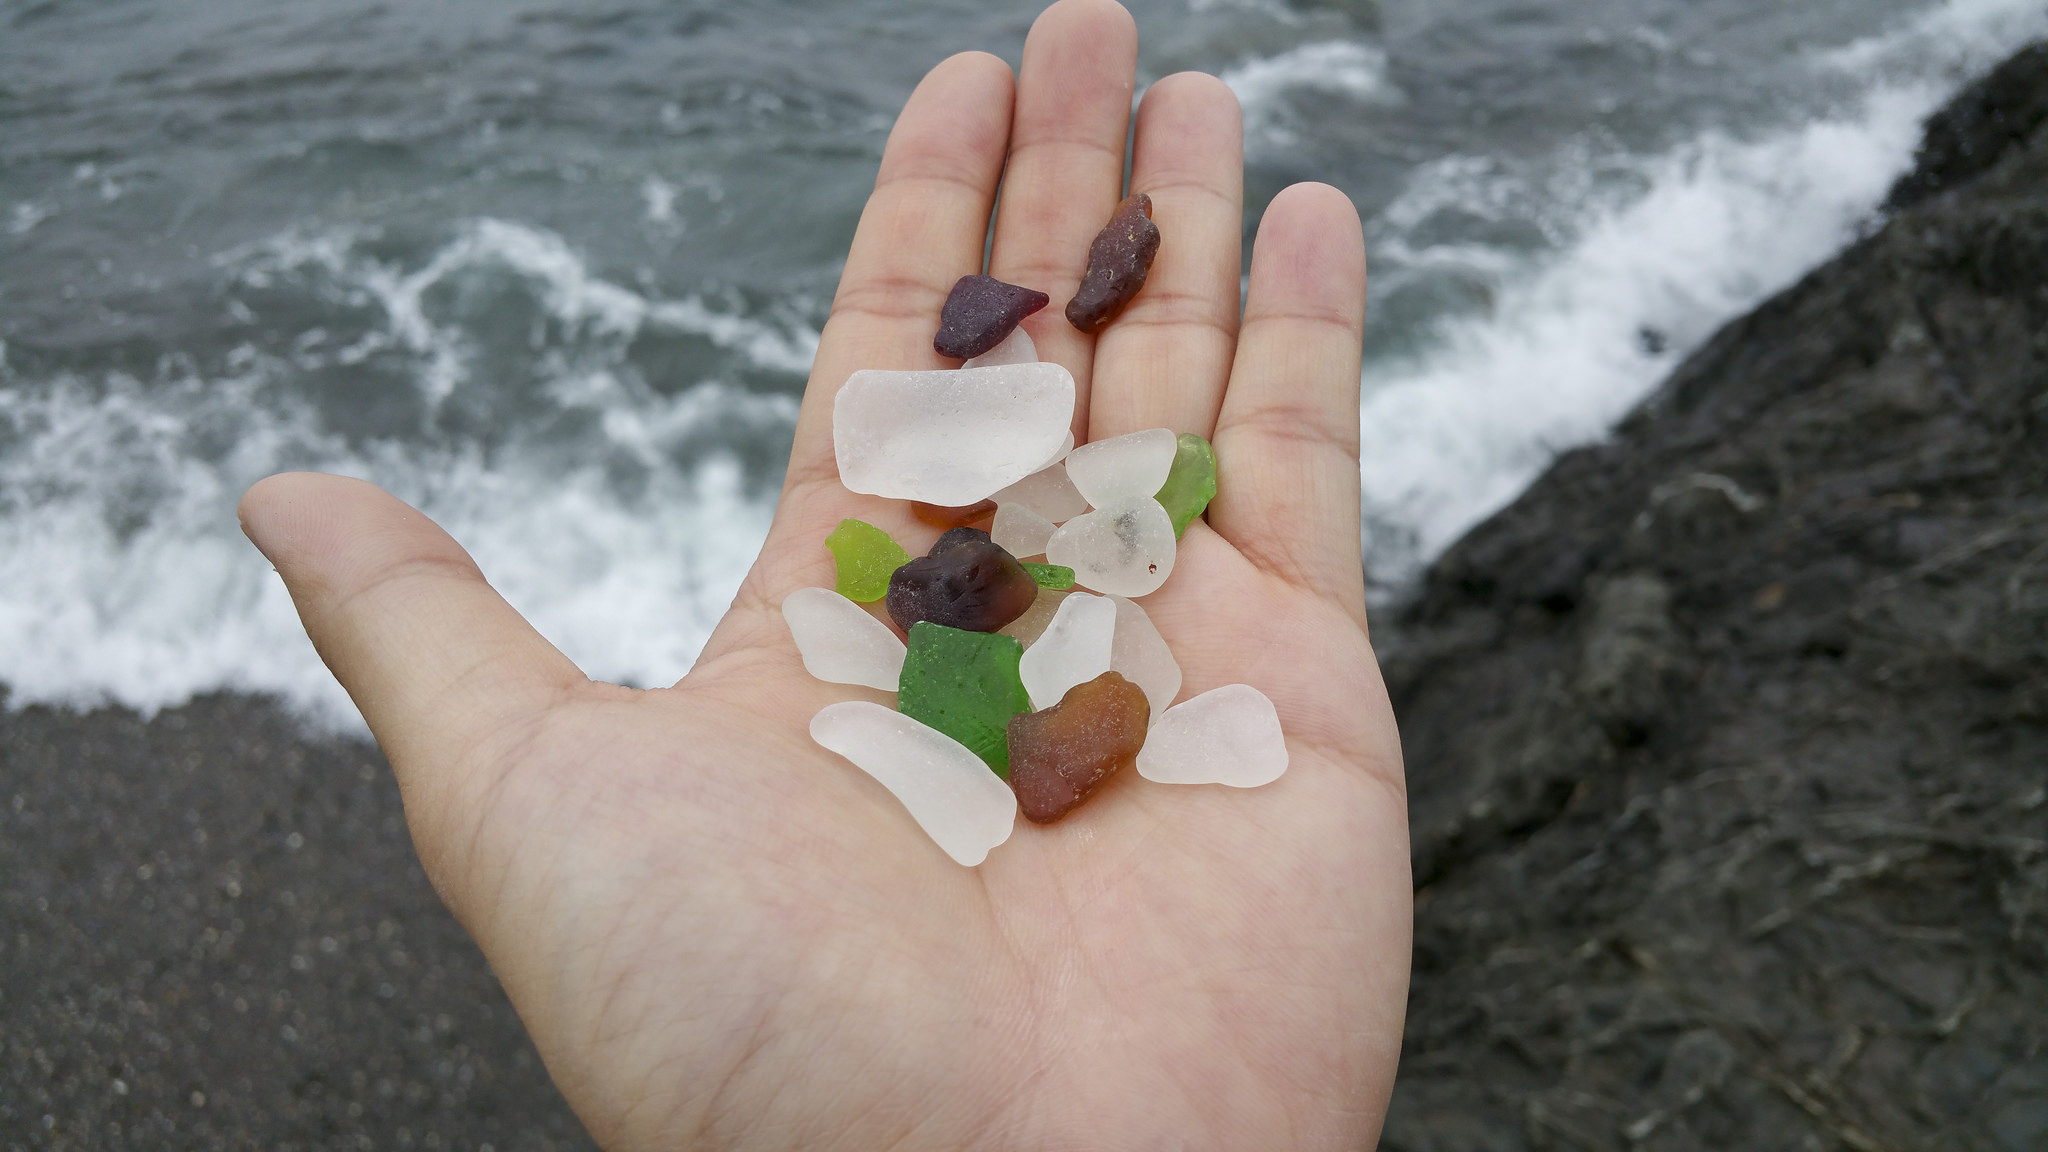 You’ll Want To Visit These 5 Beaches For The Most Beautiful Delaware Sea Glass